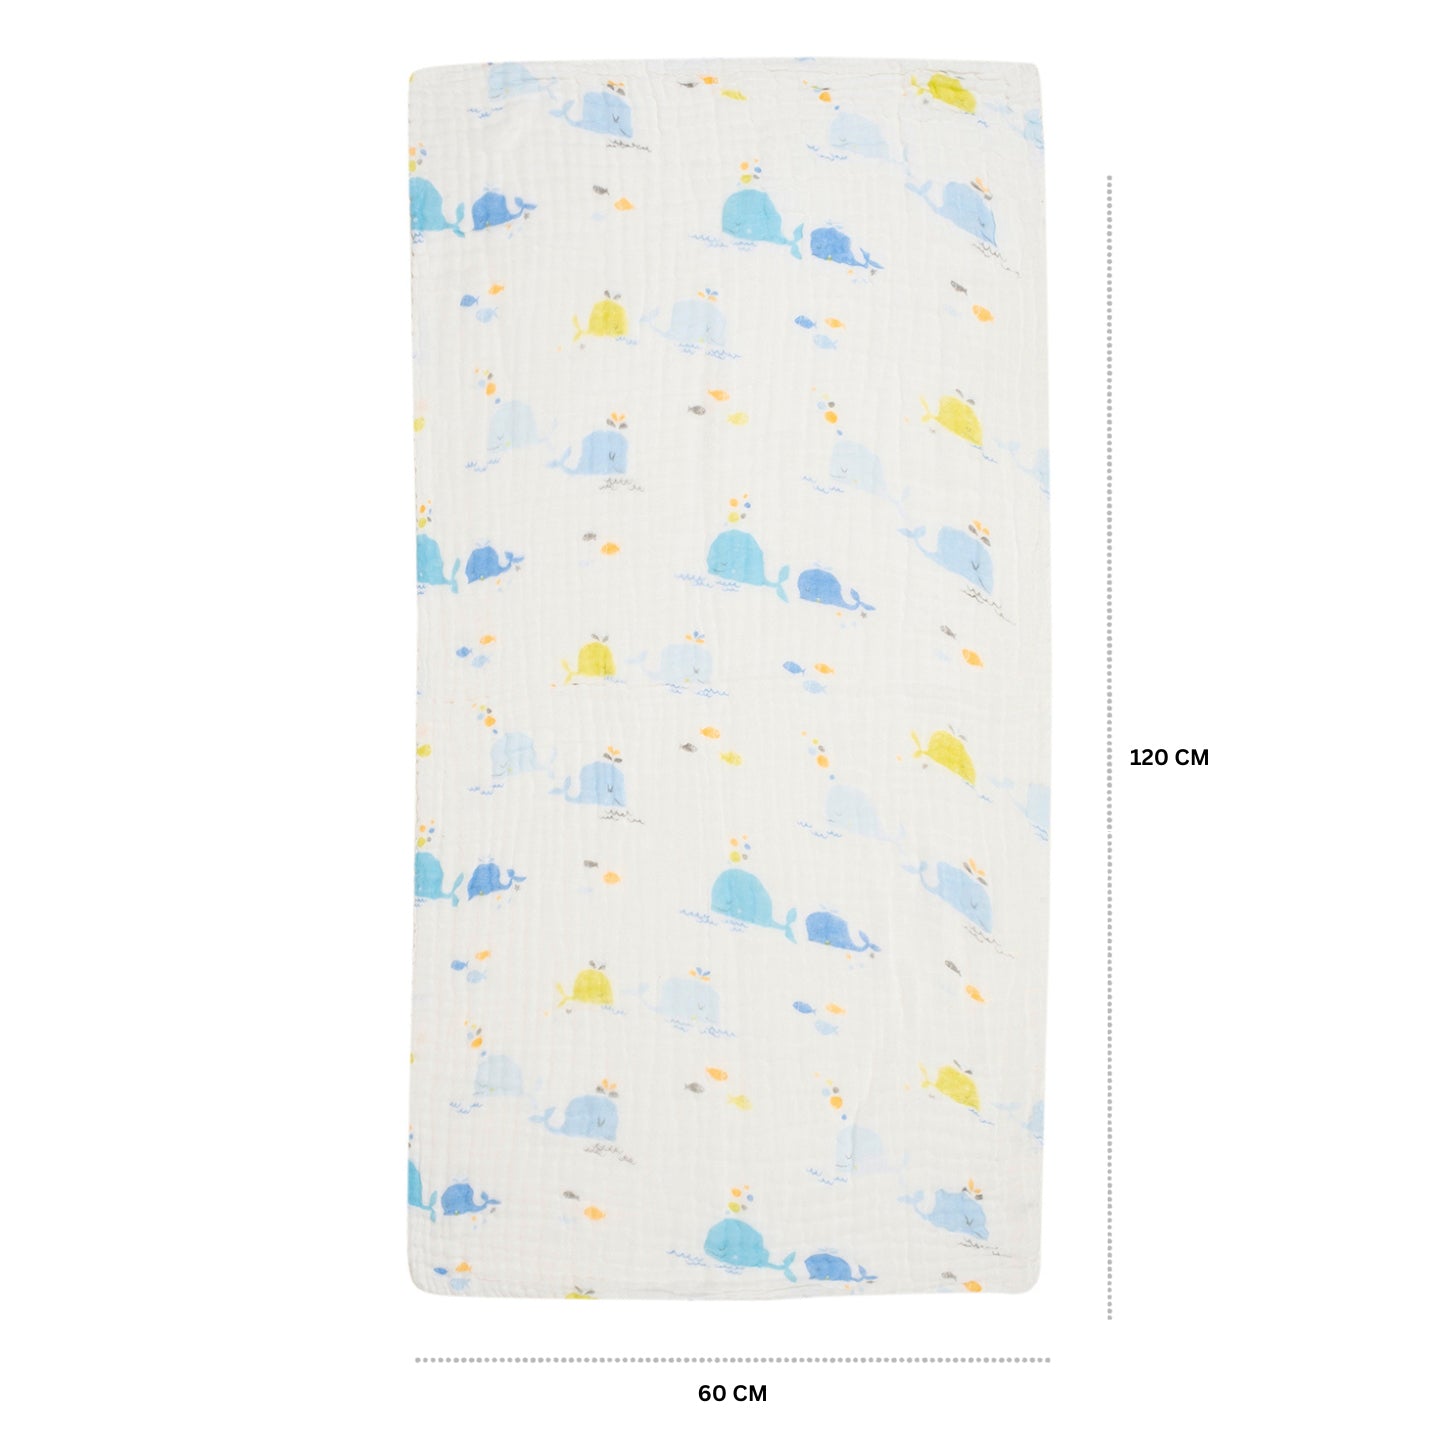 Baby Moo Dolphin 100% Cotton Ultra Soft Eco Friendly Absorbent Towel - White